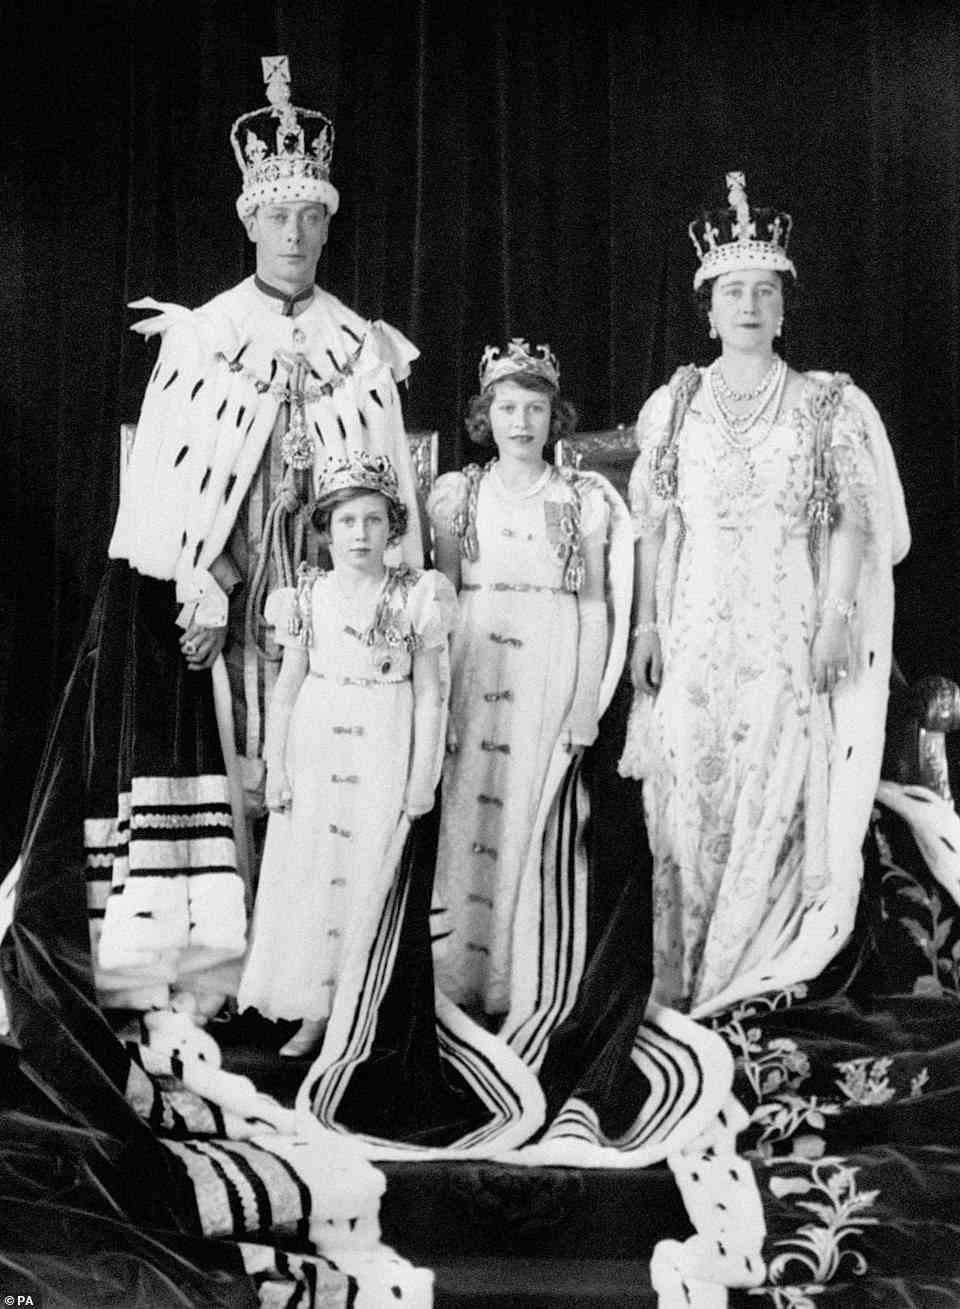 King George VI and Queen Elizabeth with their daughters Princess Elizabeth and Princess Margaret Rose after the coronation of The Duke of York as King George VI on May 12, 1937